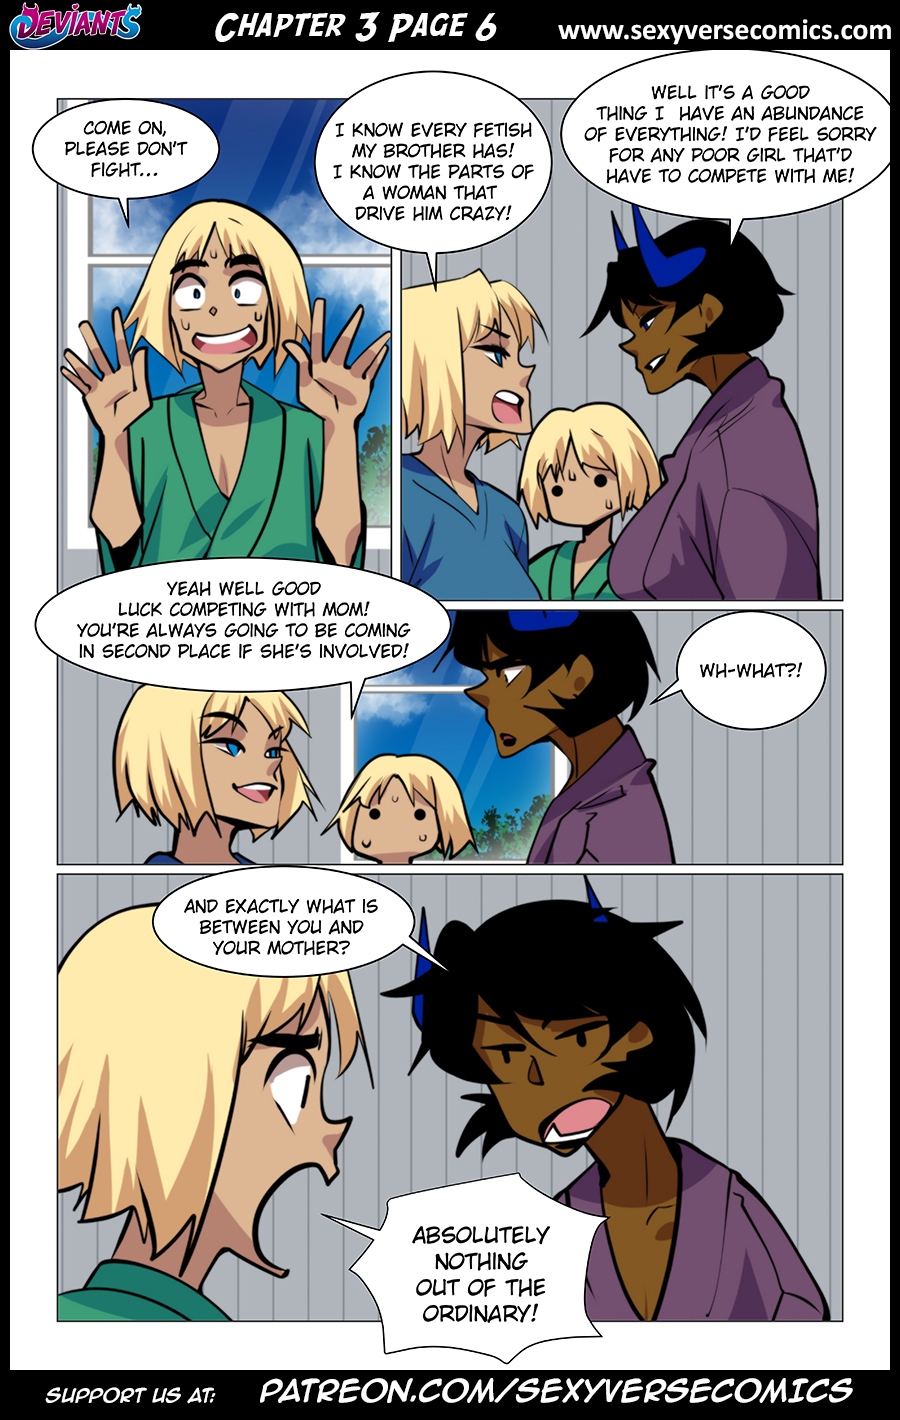 Deviants Chapter 3 Page 6